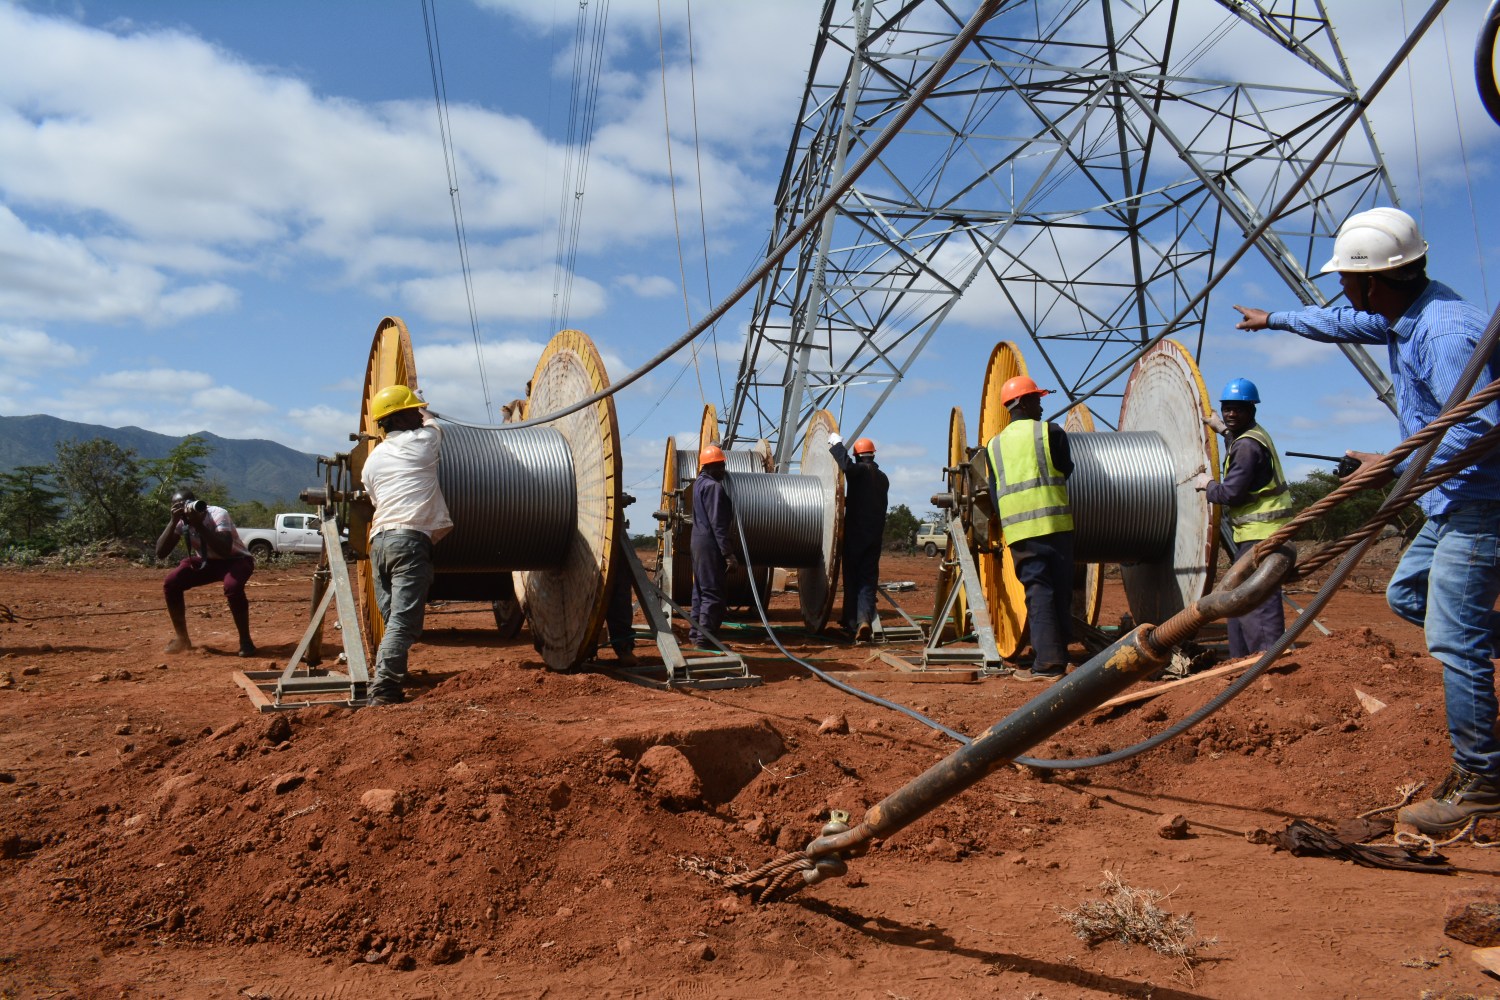 Nairobi, Kenya -June 13th 2017: Electric engineers laying down Electric transmission lines in rural Kenya, Africa. This lines transmit high power electricity to different regions countrywide.